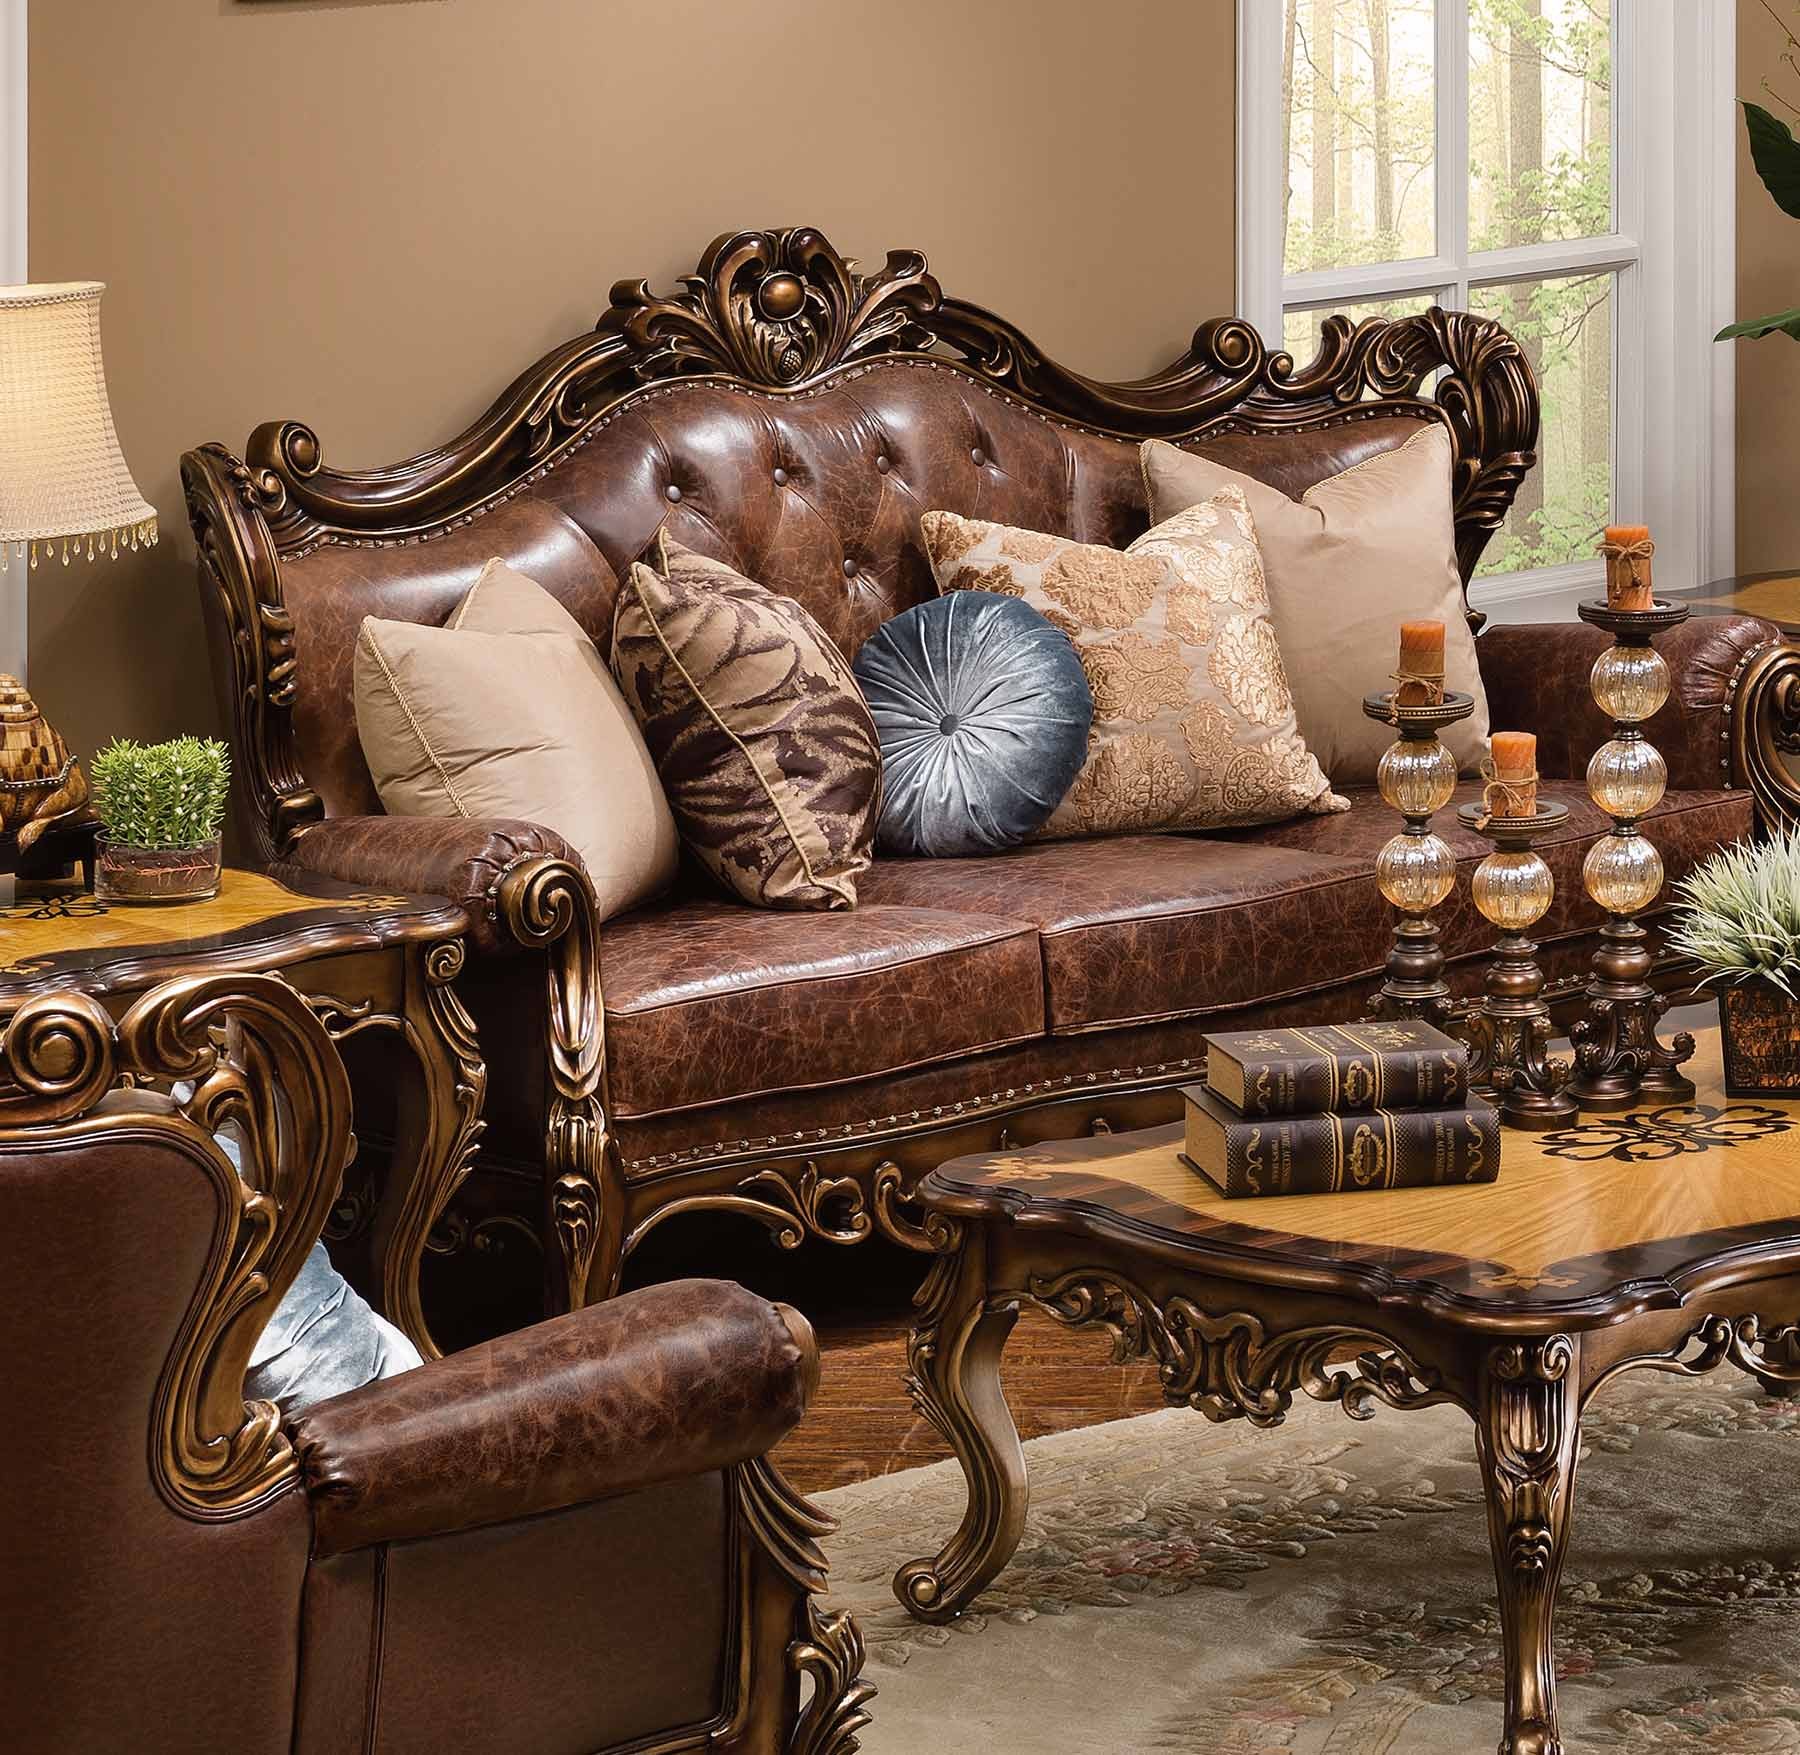 Birchwood Living Room Collection shown in Parisian Bronze finish